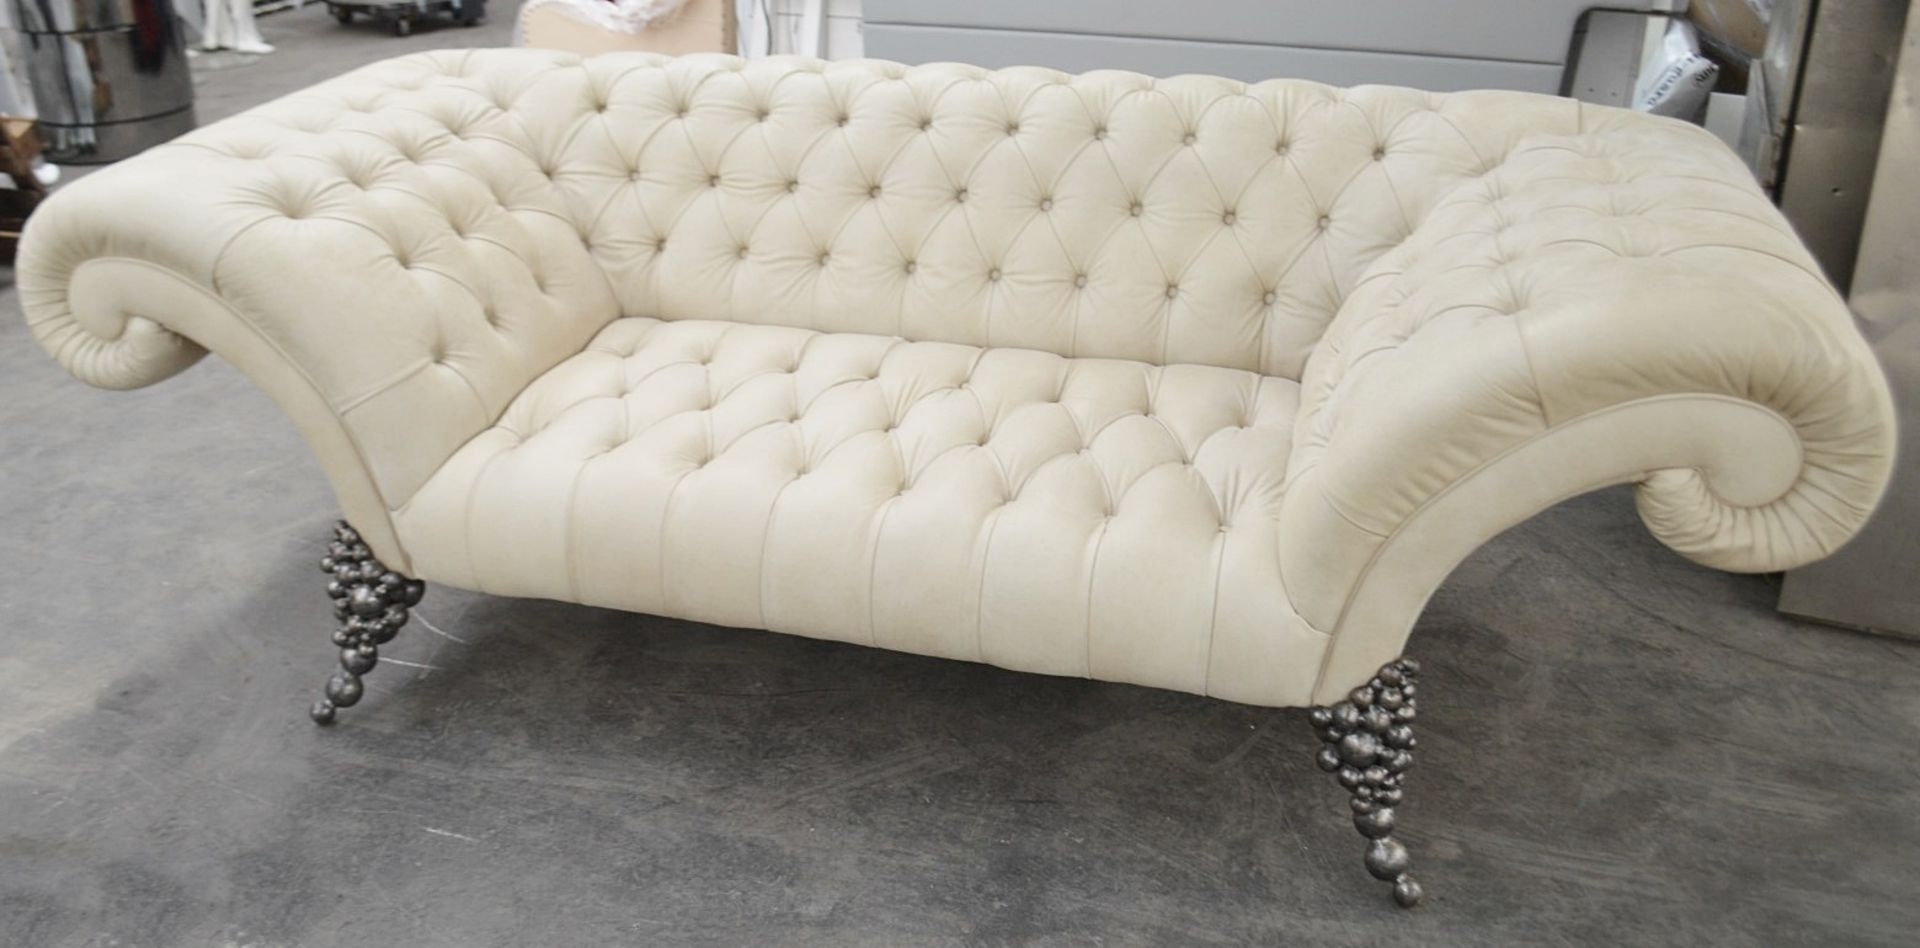 1 x Stunning Bespoke Cream Button-Back Leather Sofa - Professionally Handcrafted - Complete One-Off - Image 7 of 8